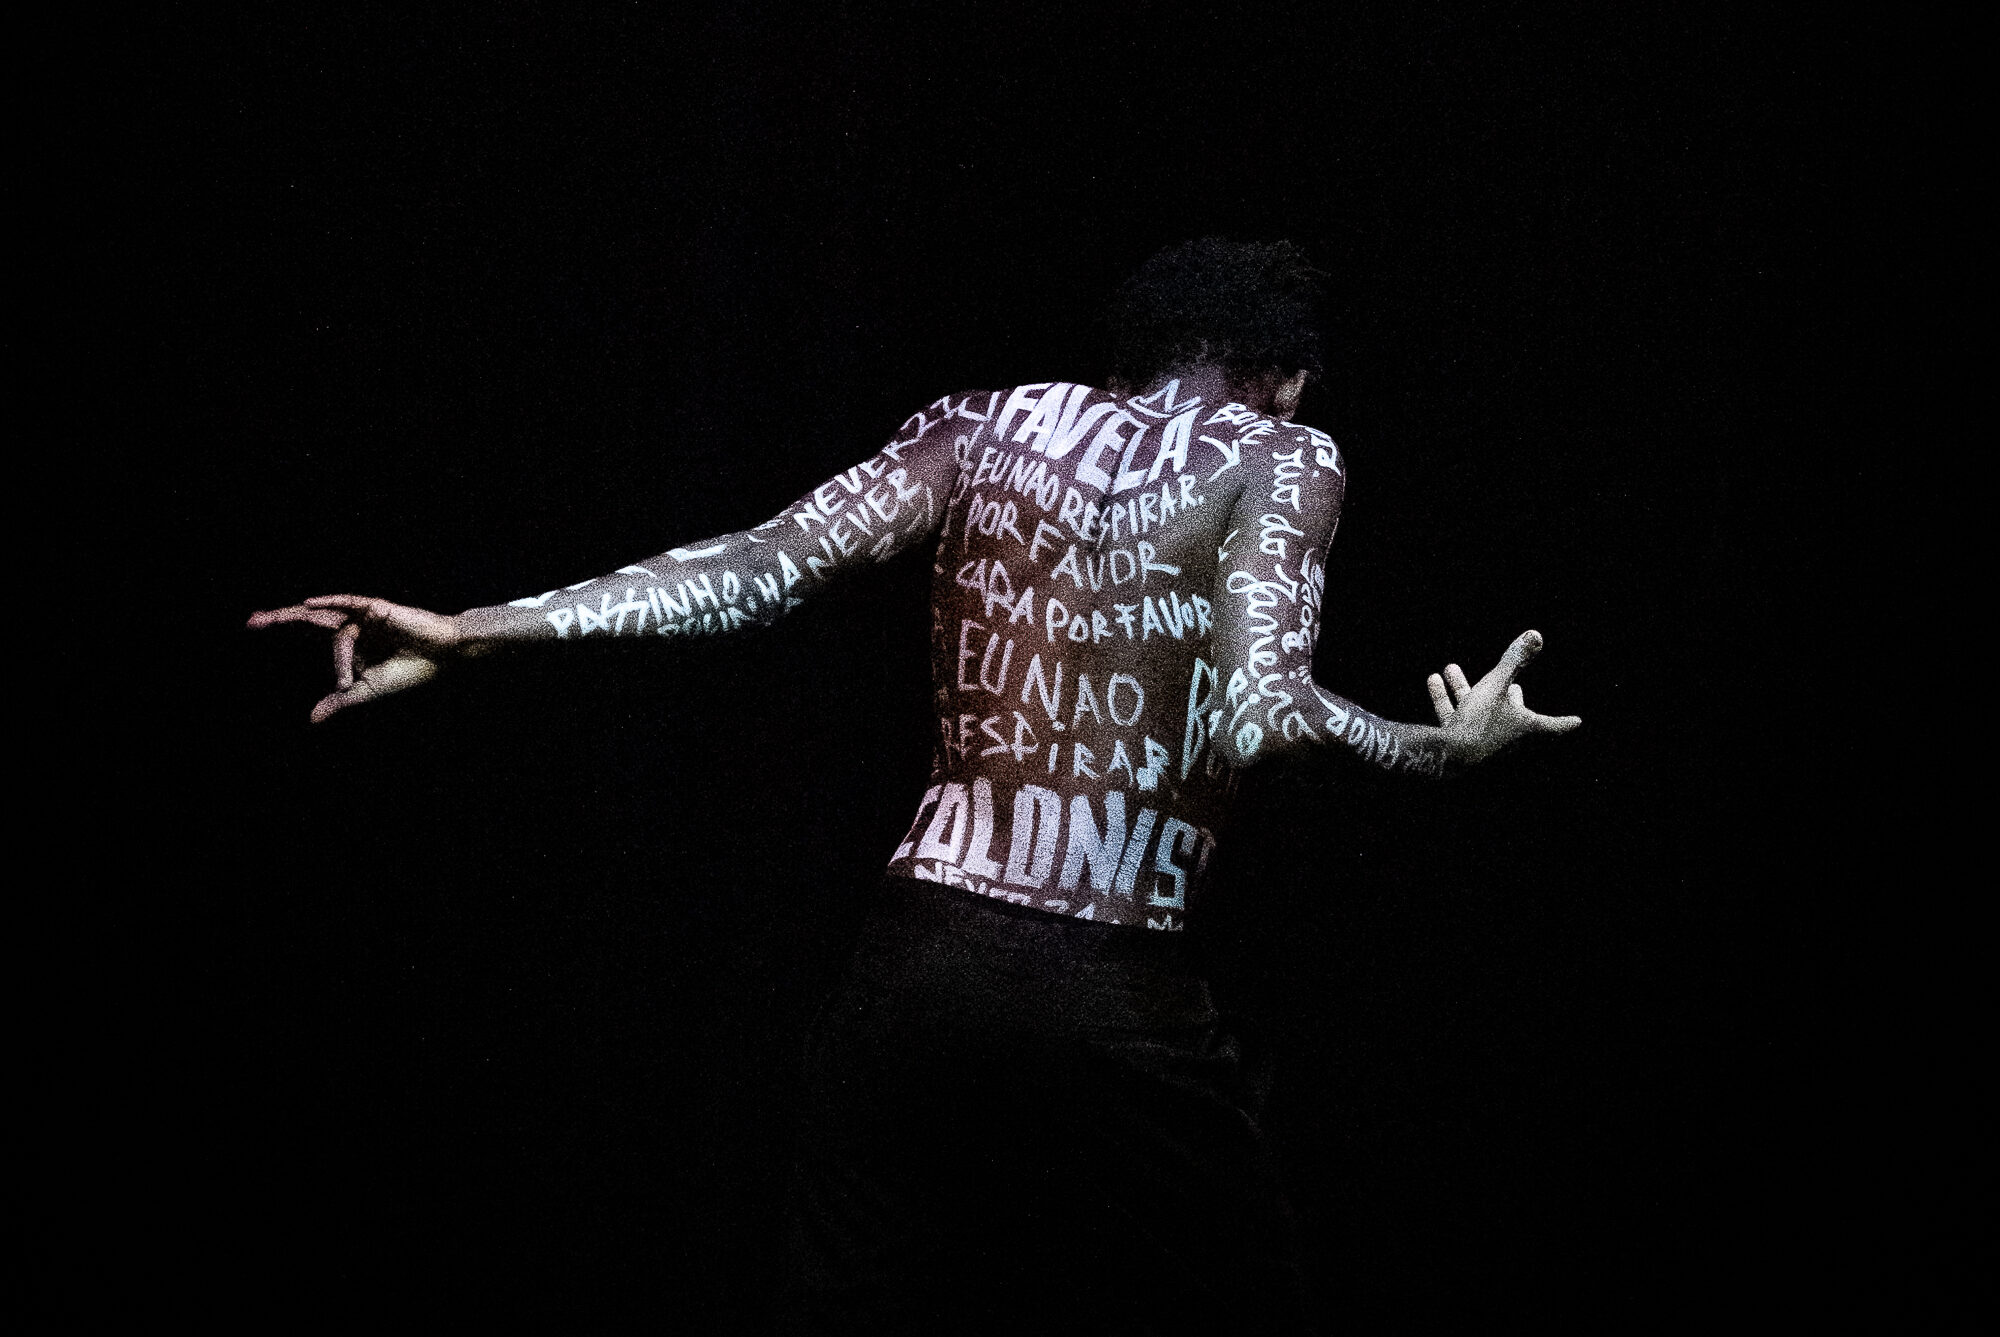 A dancer in black pants stands facing away from the camera, arms gesturing. The room is darkly lit, highlighting their bare back and arms which are covered in white-painted testimonials of the families of young Black men who have been victims of gun violence.